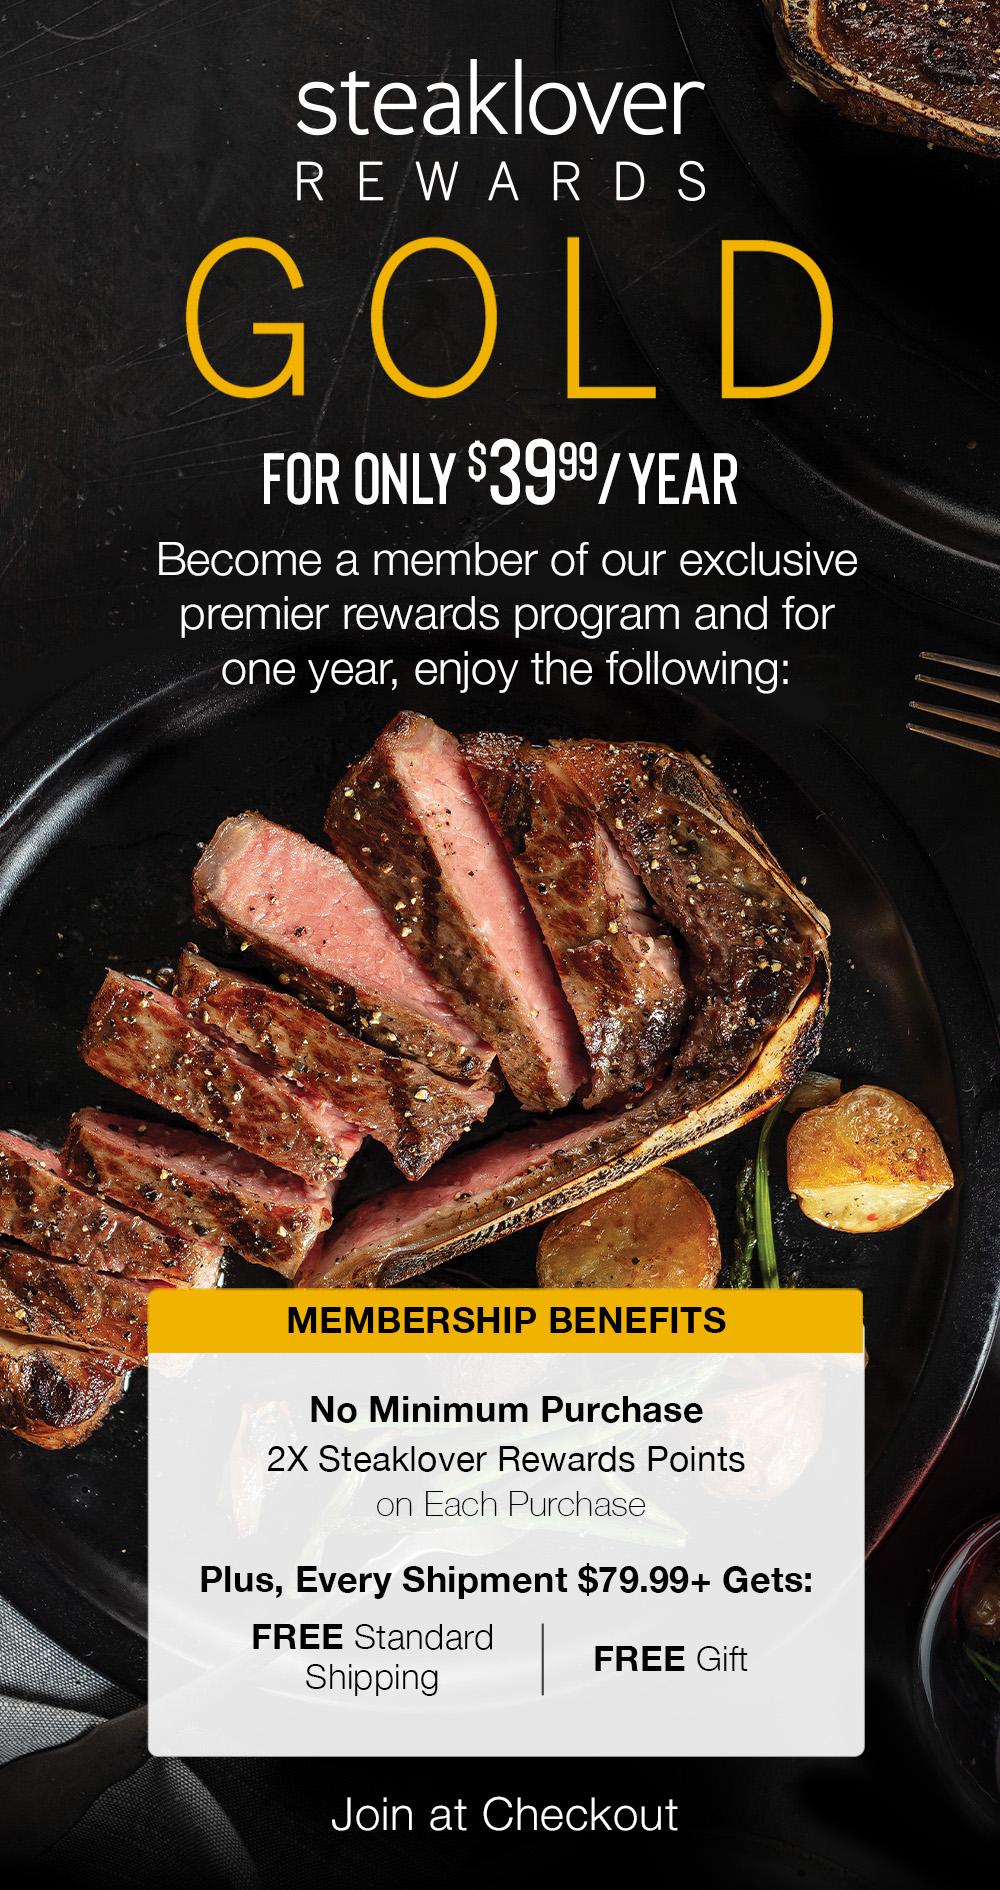 steaklover GOLD REWARDS | Join Steaklover Rewards Gold & Get FREE SHIPPING » ALWAYS « | Become a Steaklover Rewards Gold Member for just $39.99 per year. || Join at Checkout || MEMBERSHIP BENEFITS - No Minimum Purchase - 2X Steaklover Reward Points on Each Purchase | Plus, Every Shipment $79.99+ Gets: FREE Standard Shipping | FREE Gift  steaklover Rl AT R FOR ONLY $39%3 YEAR Become a member of our exclusive premier rewards program and for one year, enjoy the following: No Minimum Purchase 2X Steaklover Rewards Points on Each Purchase Plus, Every Shipment $79.99 Gets: FREE Standard Shipping FREE Gift Join at Checkout 